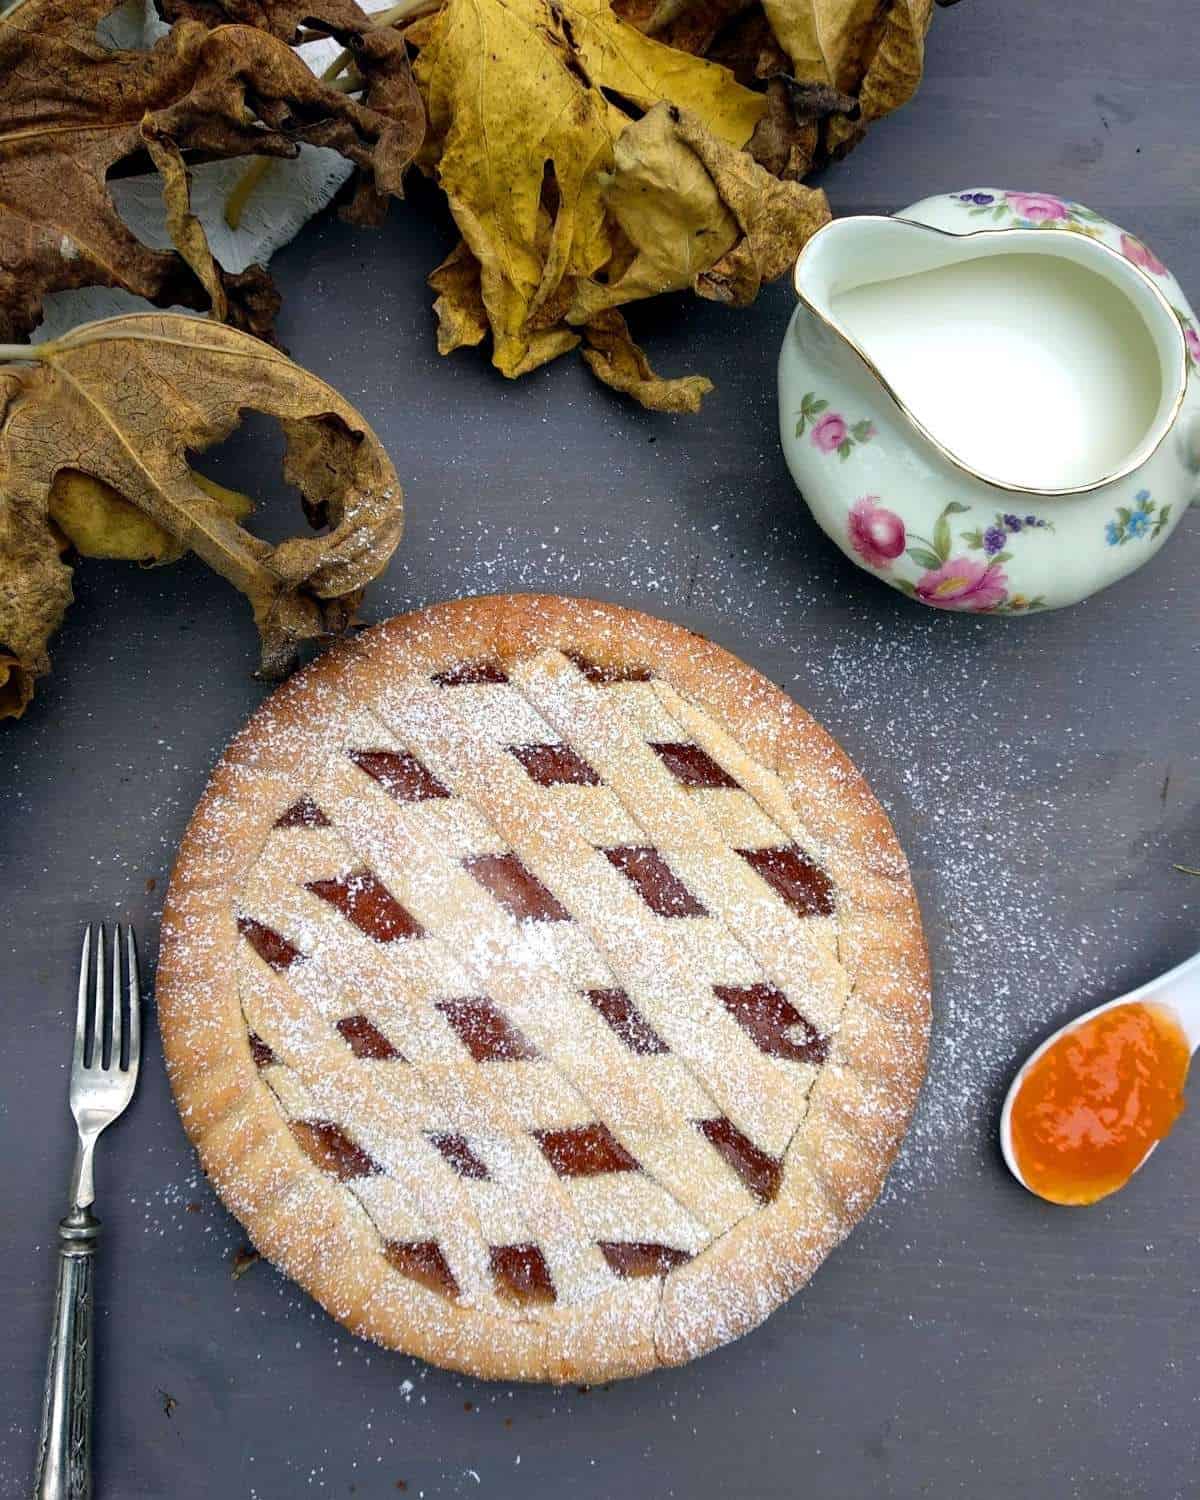 A close up shot from above of the Apricot Crostata showing the lattice with apricot jam. The tar is on a blue surface with a spoon full of jam on the right side and a fork opposite side